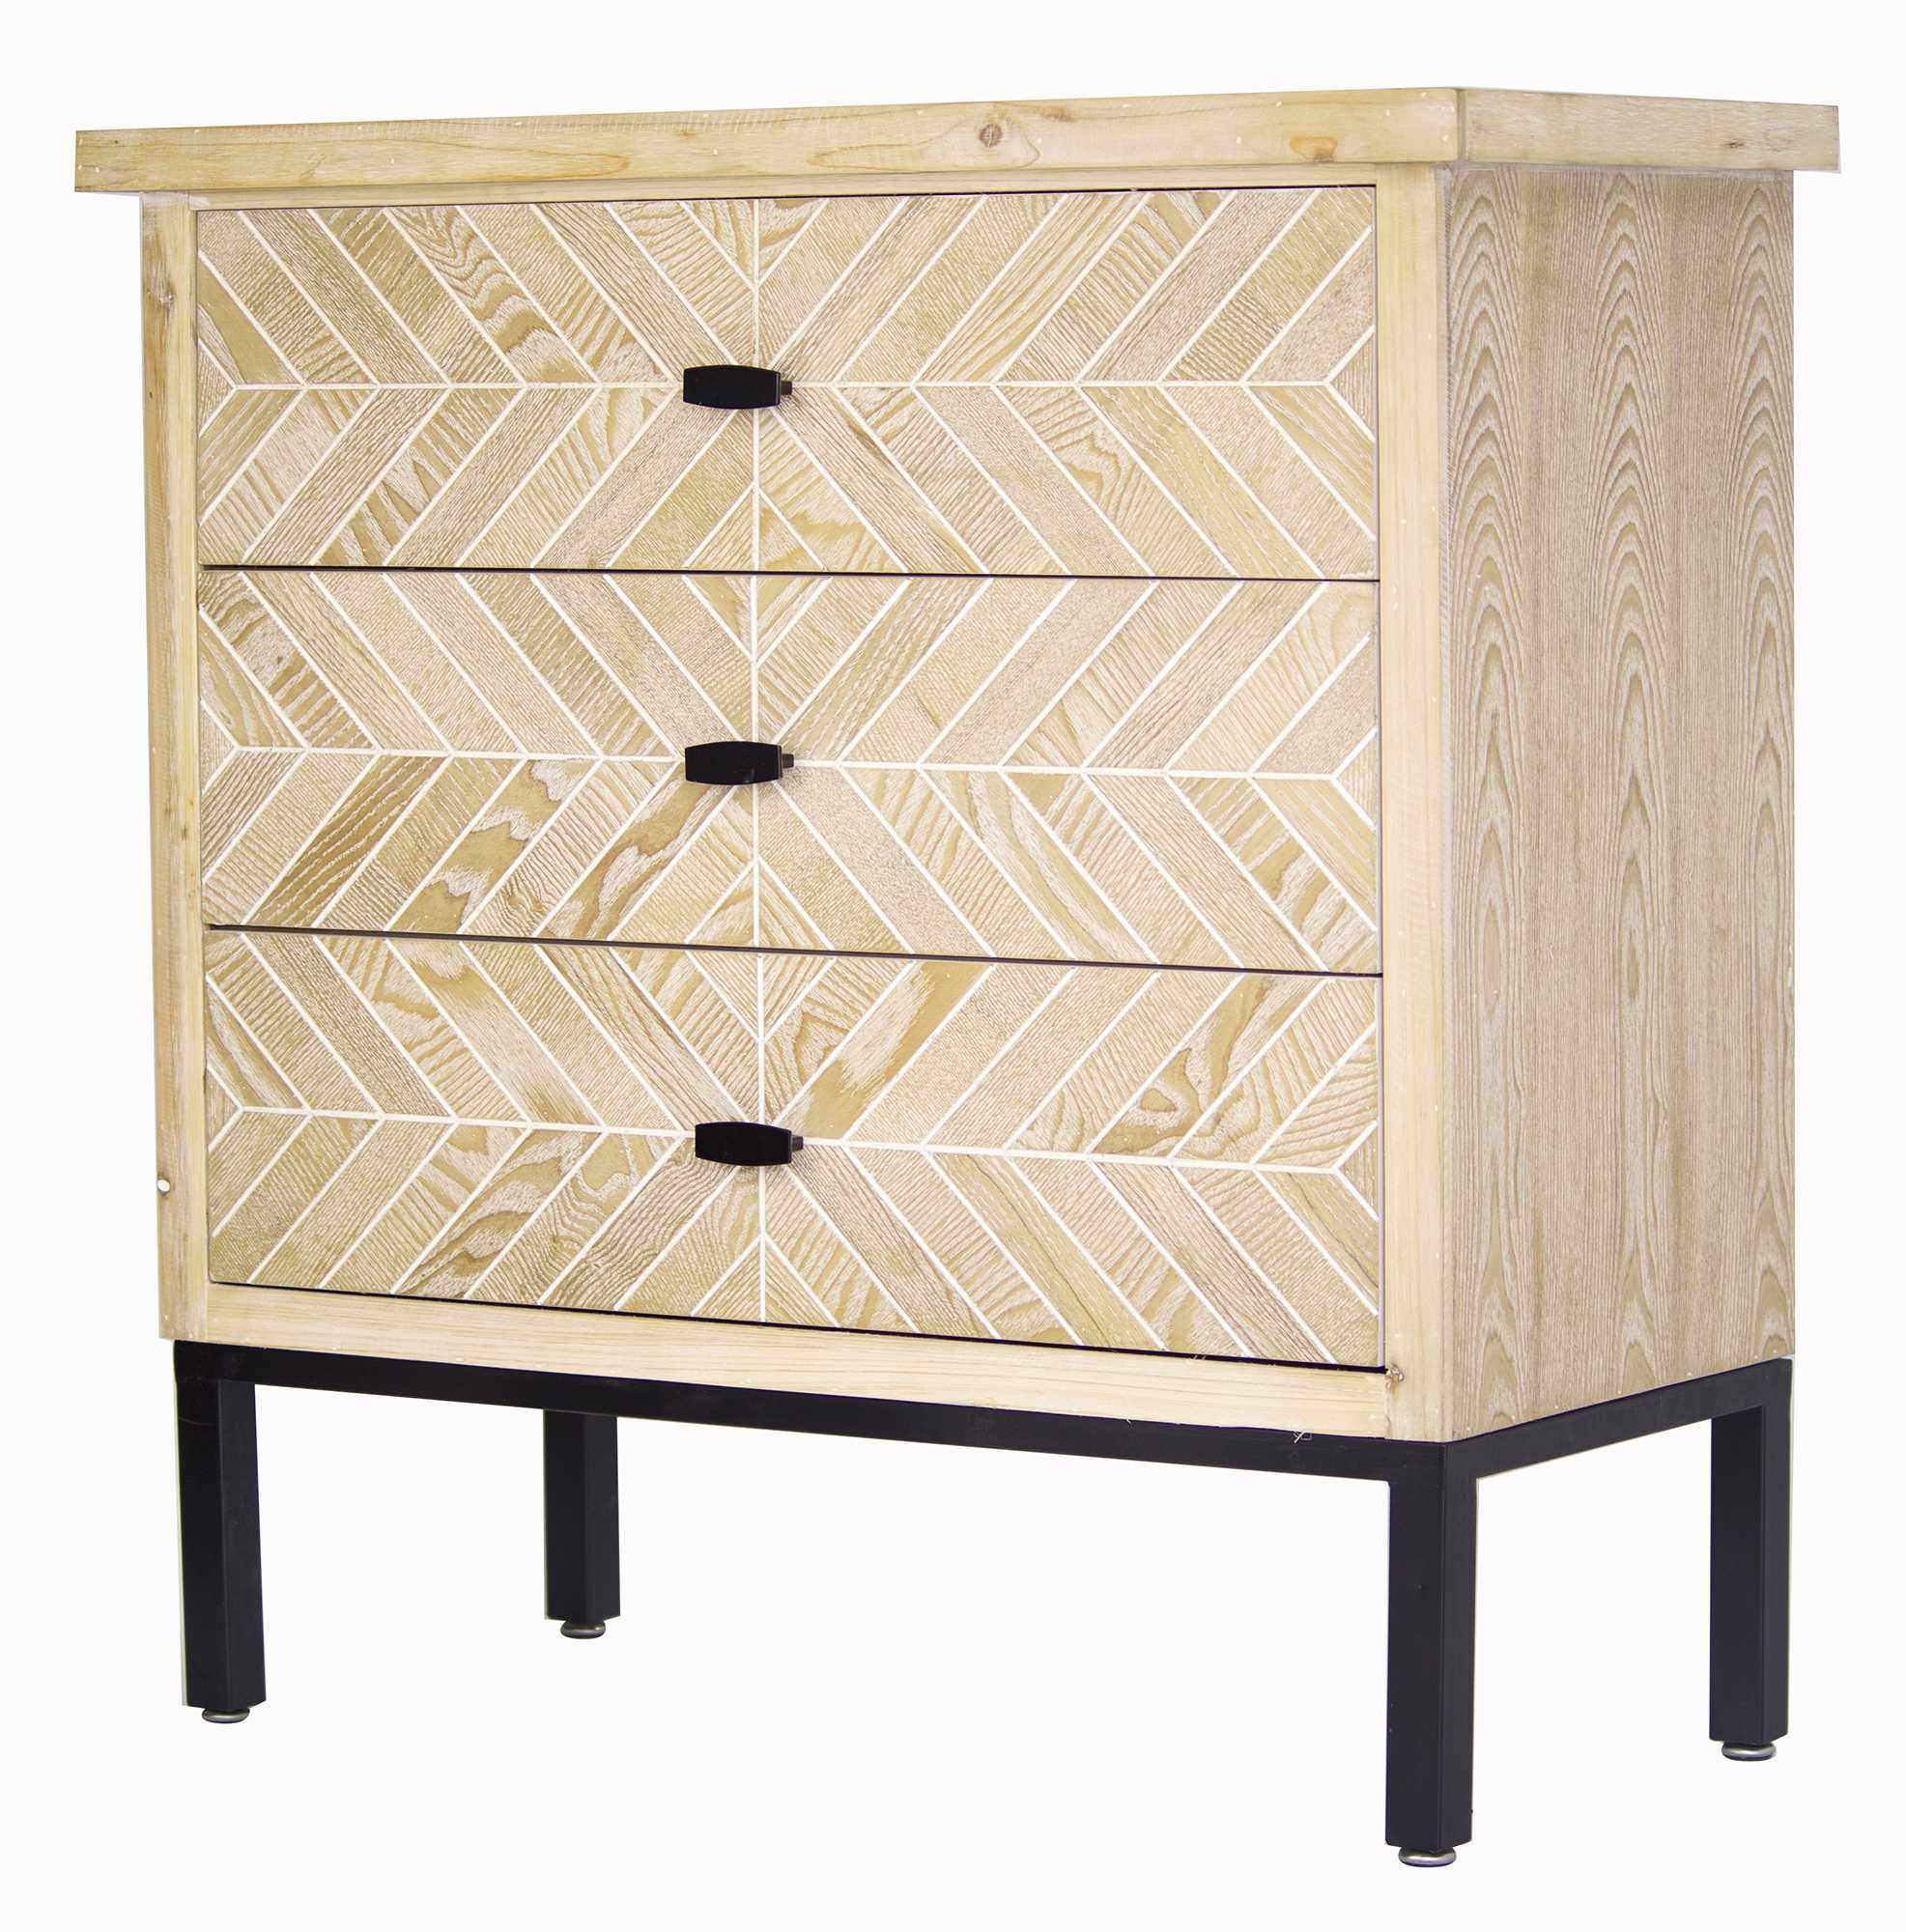 31.5" X 15" X 31.8" White Washed Parquet Iron Wood MDF Accent Cabinet with anFrame and Doors